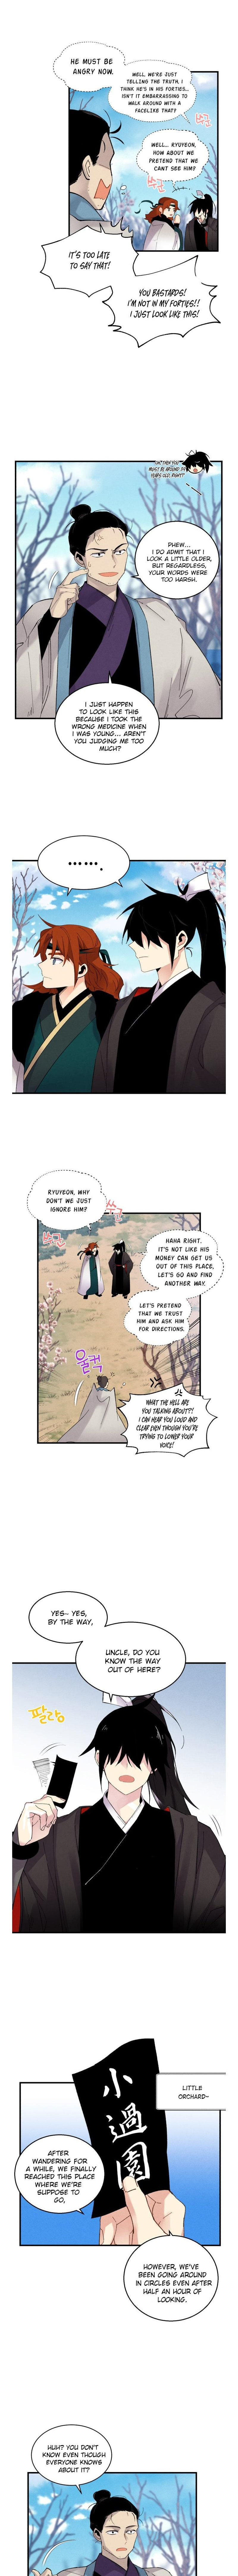 Lightning Degree - Chapter 75 Page 4